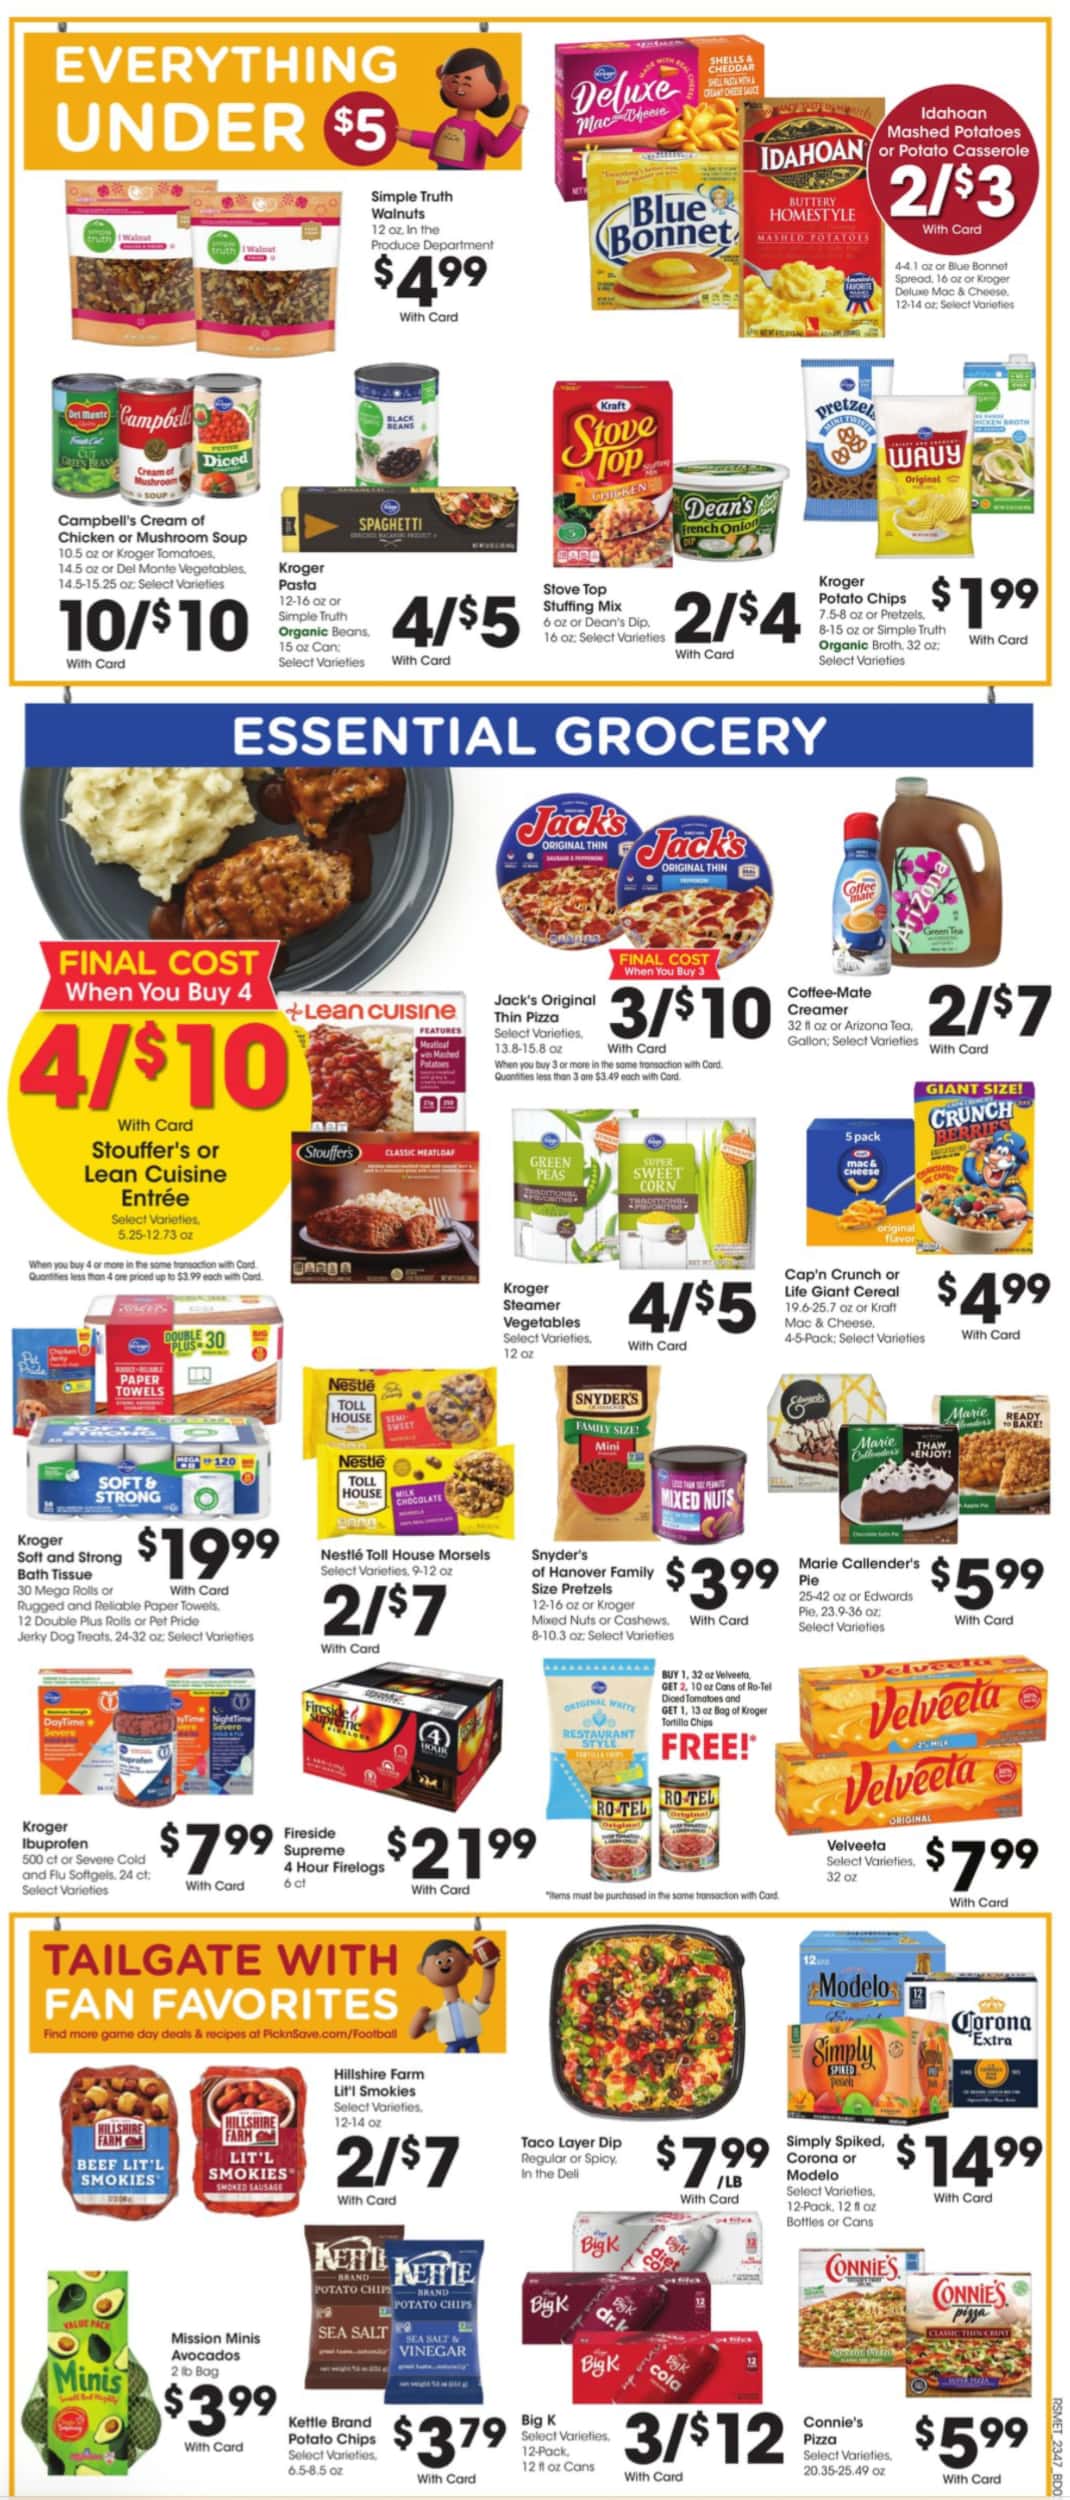 Pick n Save Christmas July 2024 Weekly Sales, Deals, Discounts and Digital Coupons.